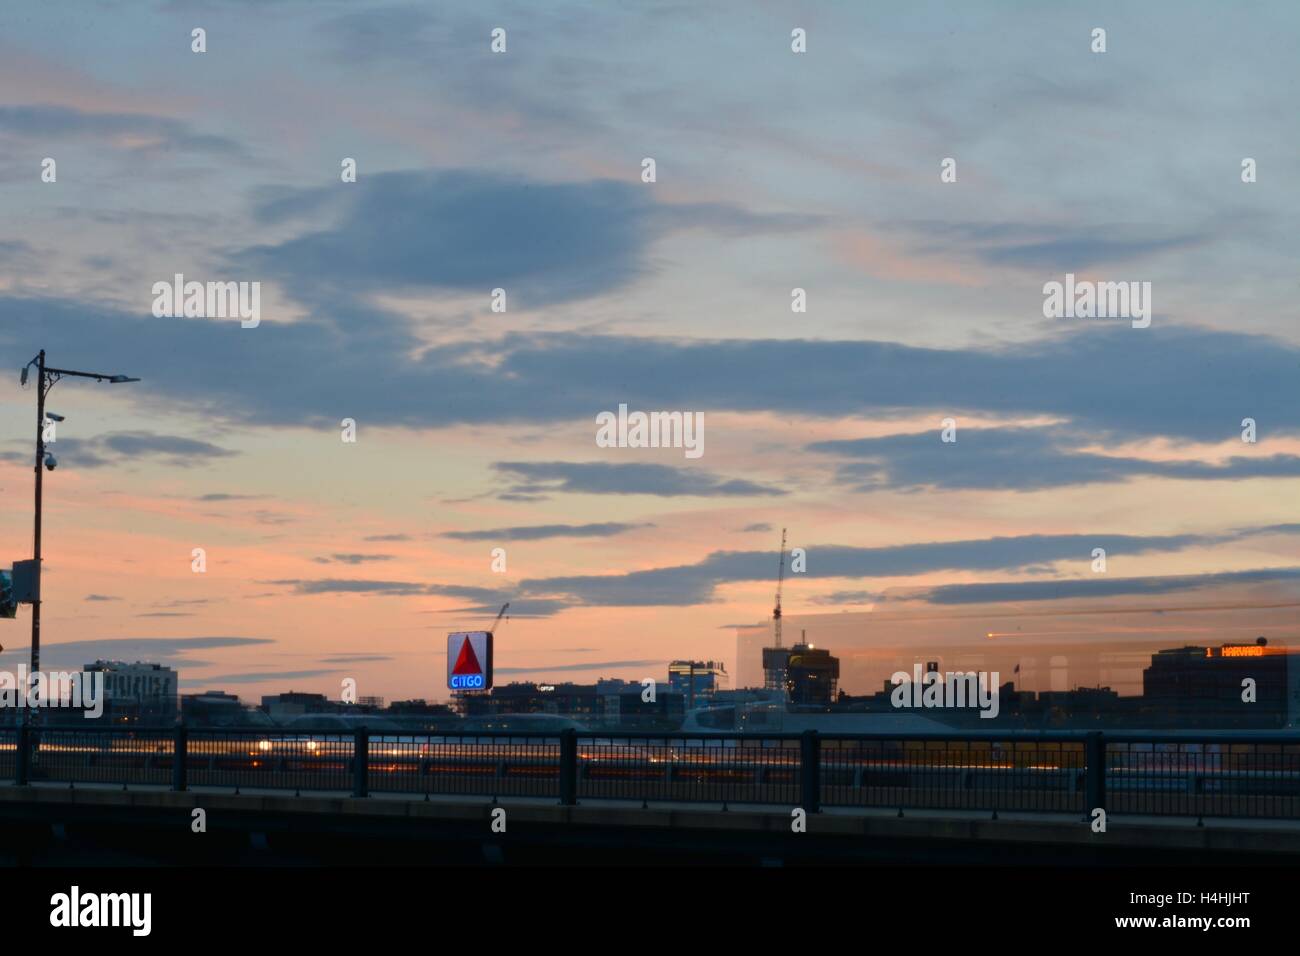 A long exopsure of the iconic Citgo sign above Kenmore Square in Boston, Massachusetts with a reddish pink evening sky. Stock Photo